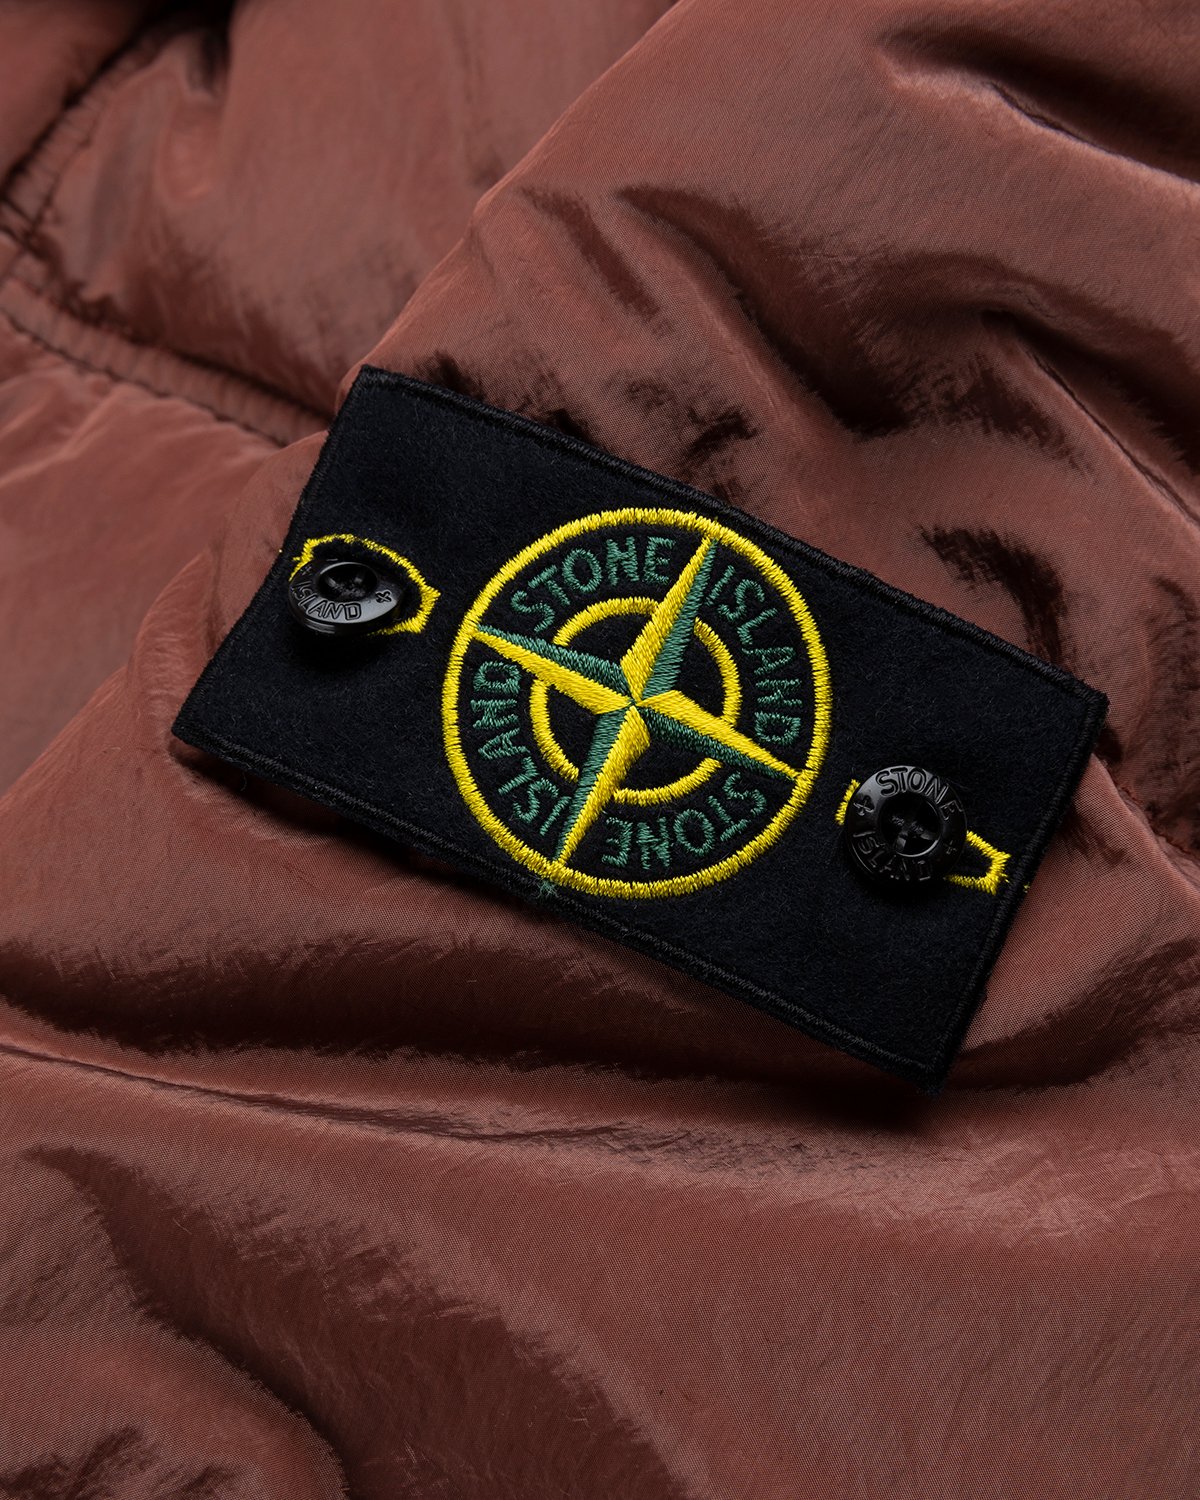 Stone Island - Real Down Jacket Brick Red - Clothing - Red - Image 5